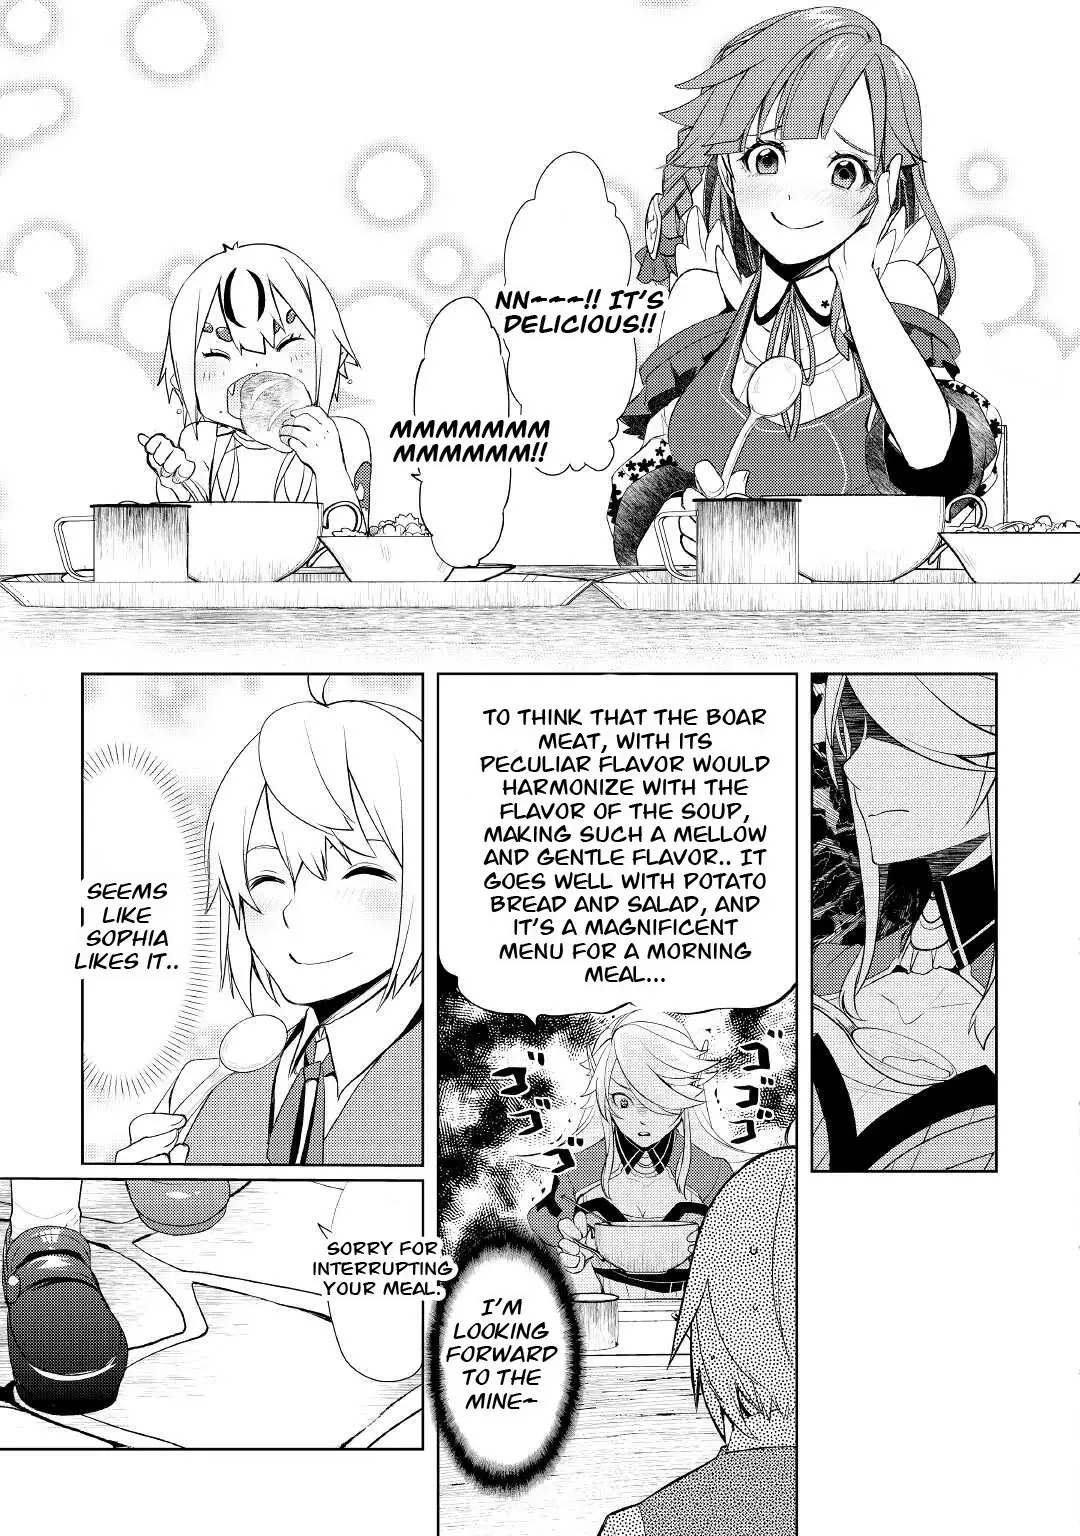 Someday Will I Be The Greatest Alchemist? - 31 page 19-021b6064